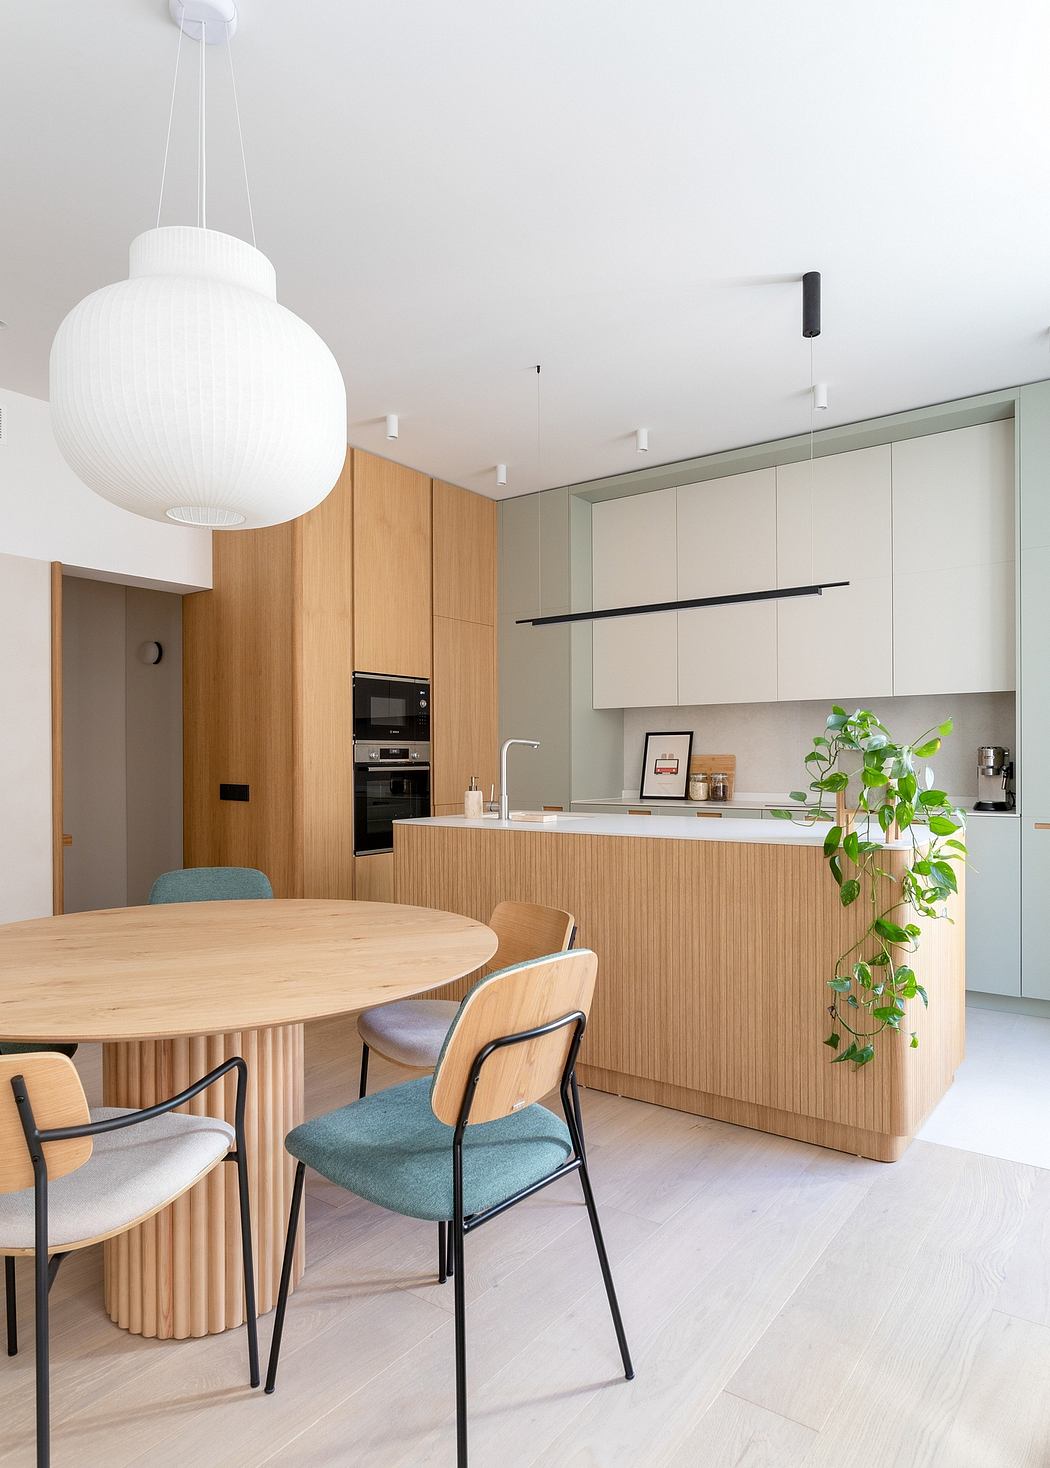 Sleek, minimalist kitchen with light wood cabinets, round dining table, and potted plant.